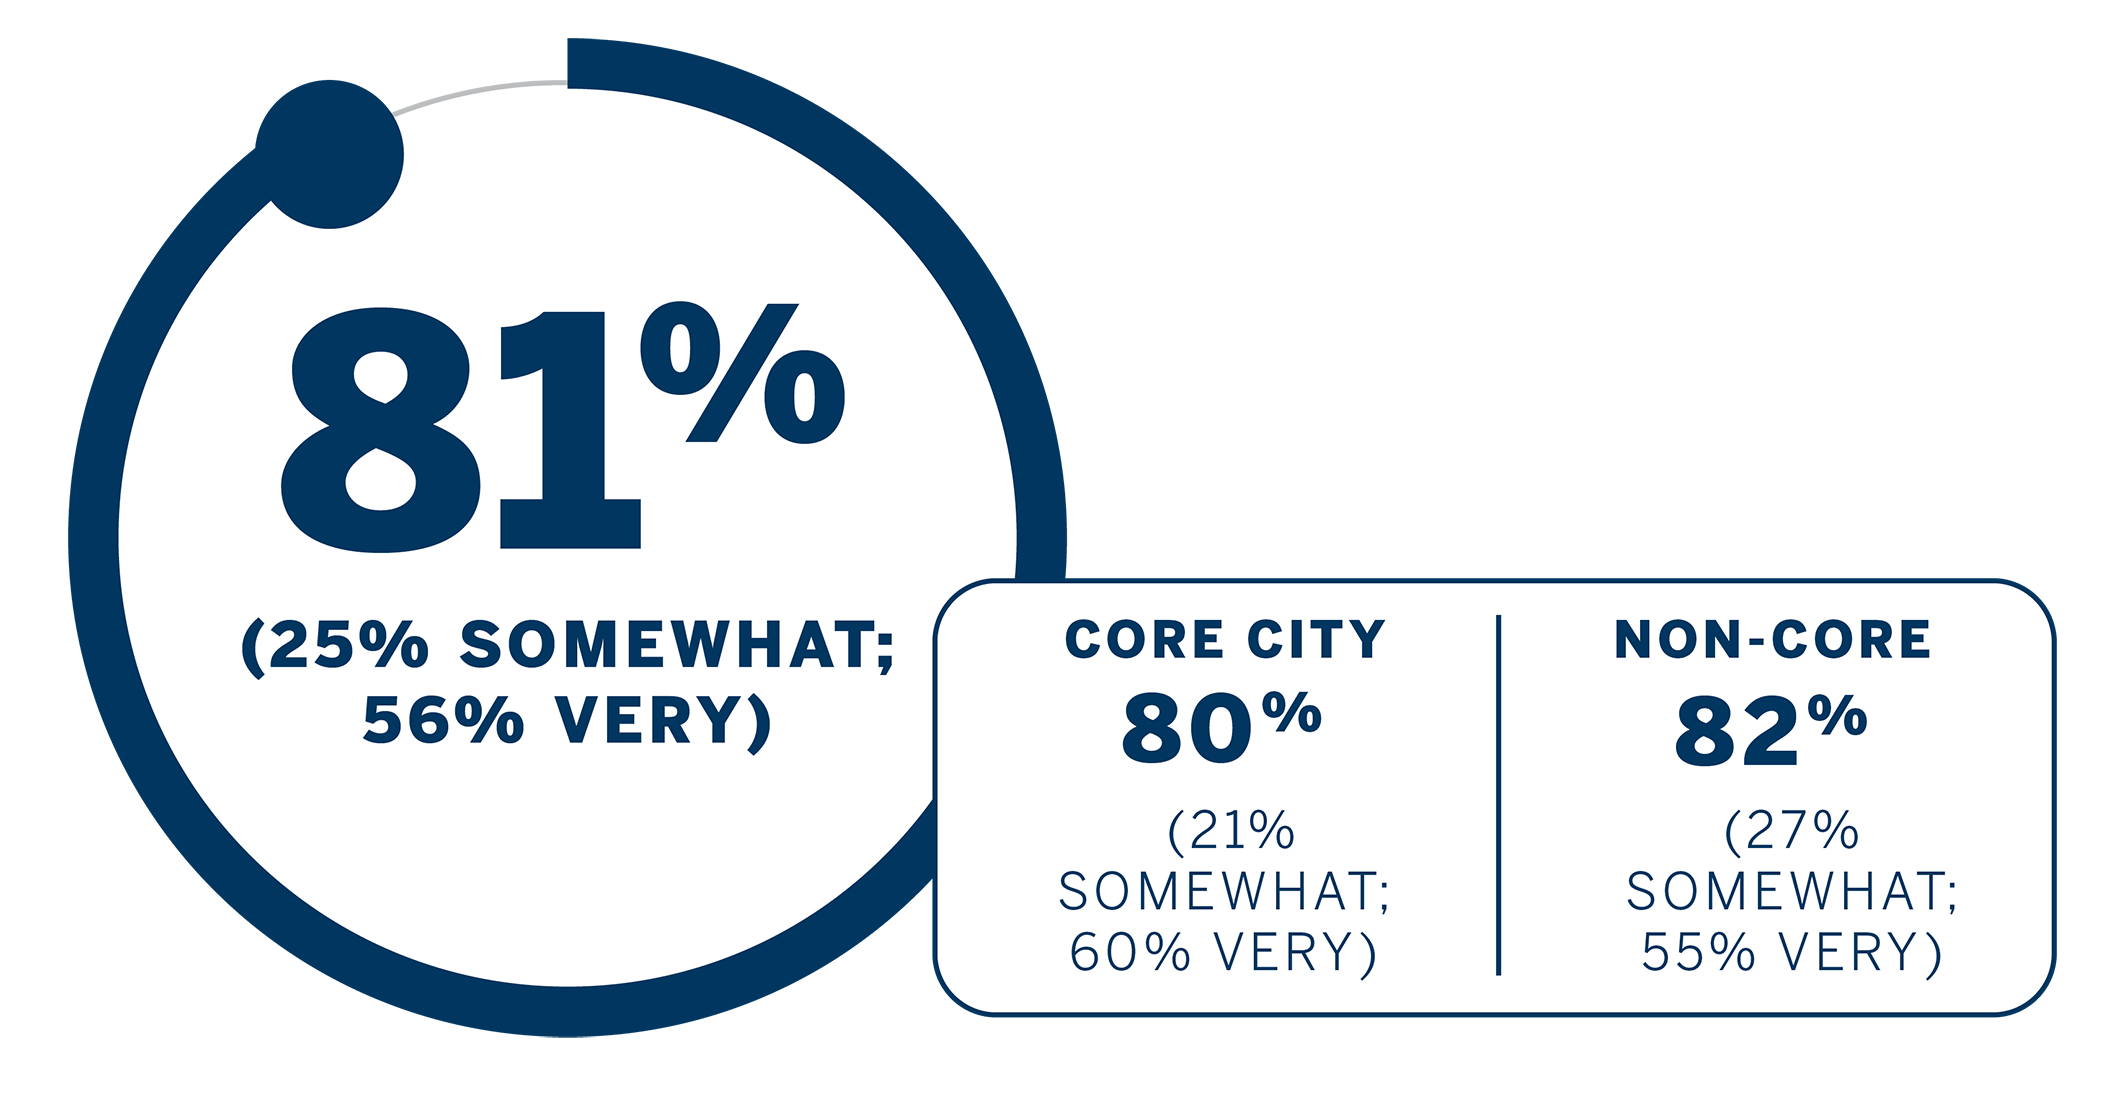 Using Technology: 81% (broken down by 25% somewhat and 56% very); Core City: 80% (broken down by 21% somewhat and 60% very); None-Core: 82% (broken down by 27% somewhat and 55% very)